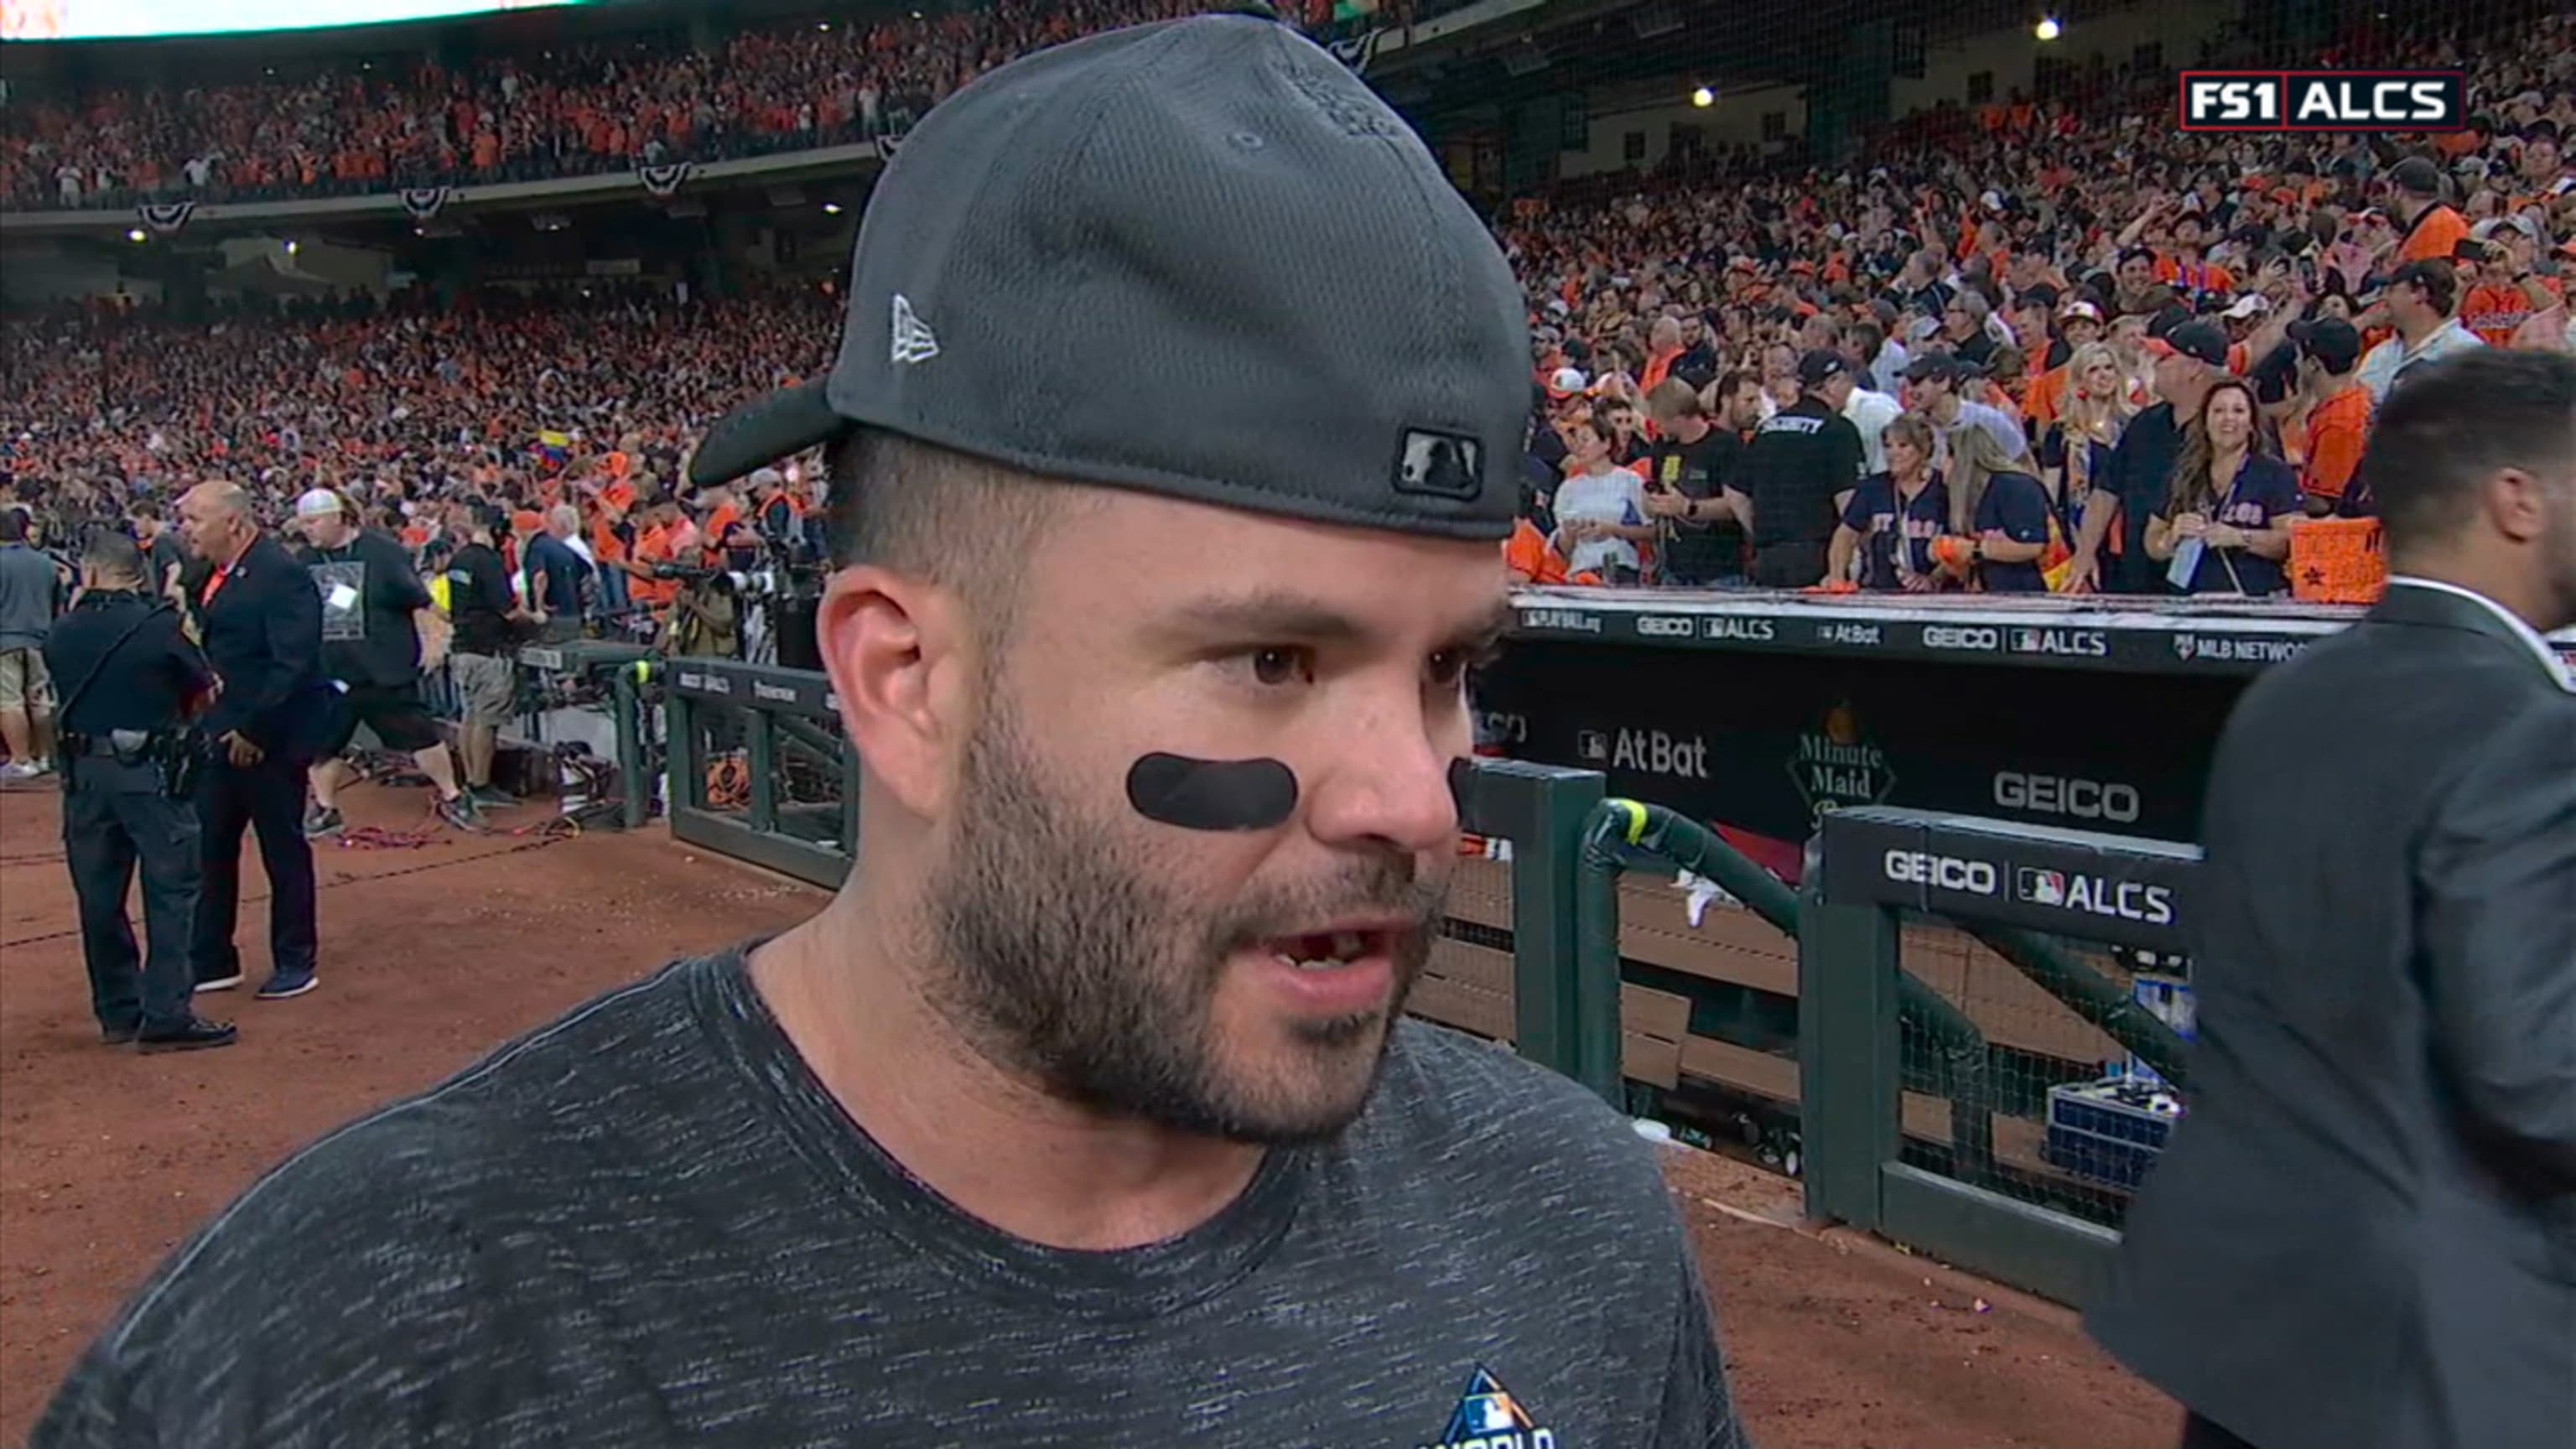 Could this be the real reason Jose Altuve didn't want his jersey ripped off  after the ALCS home run?